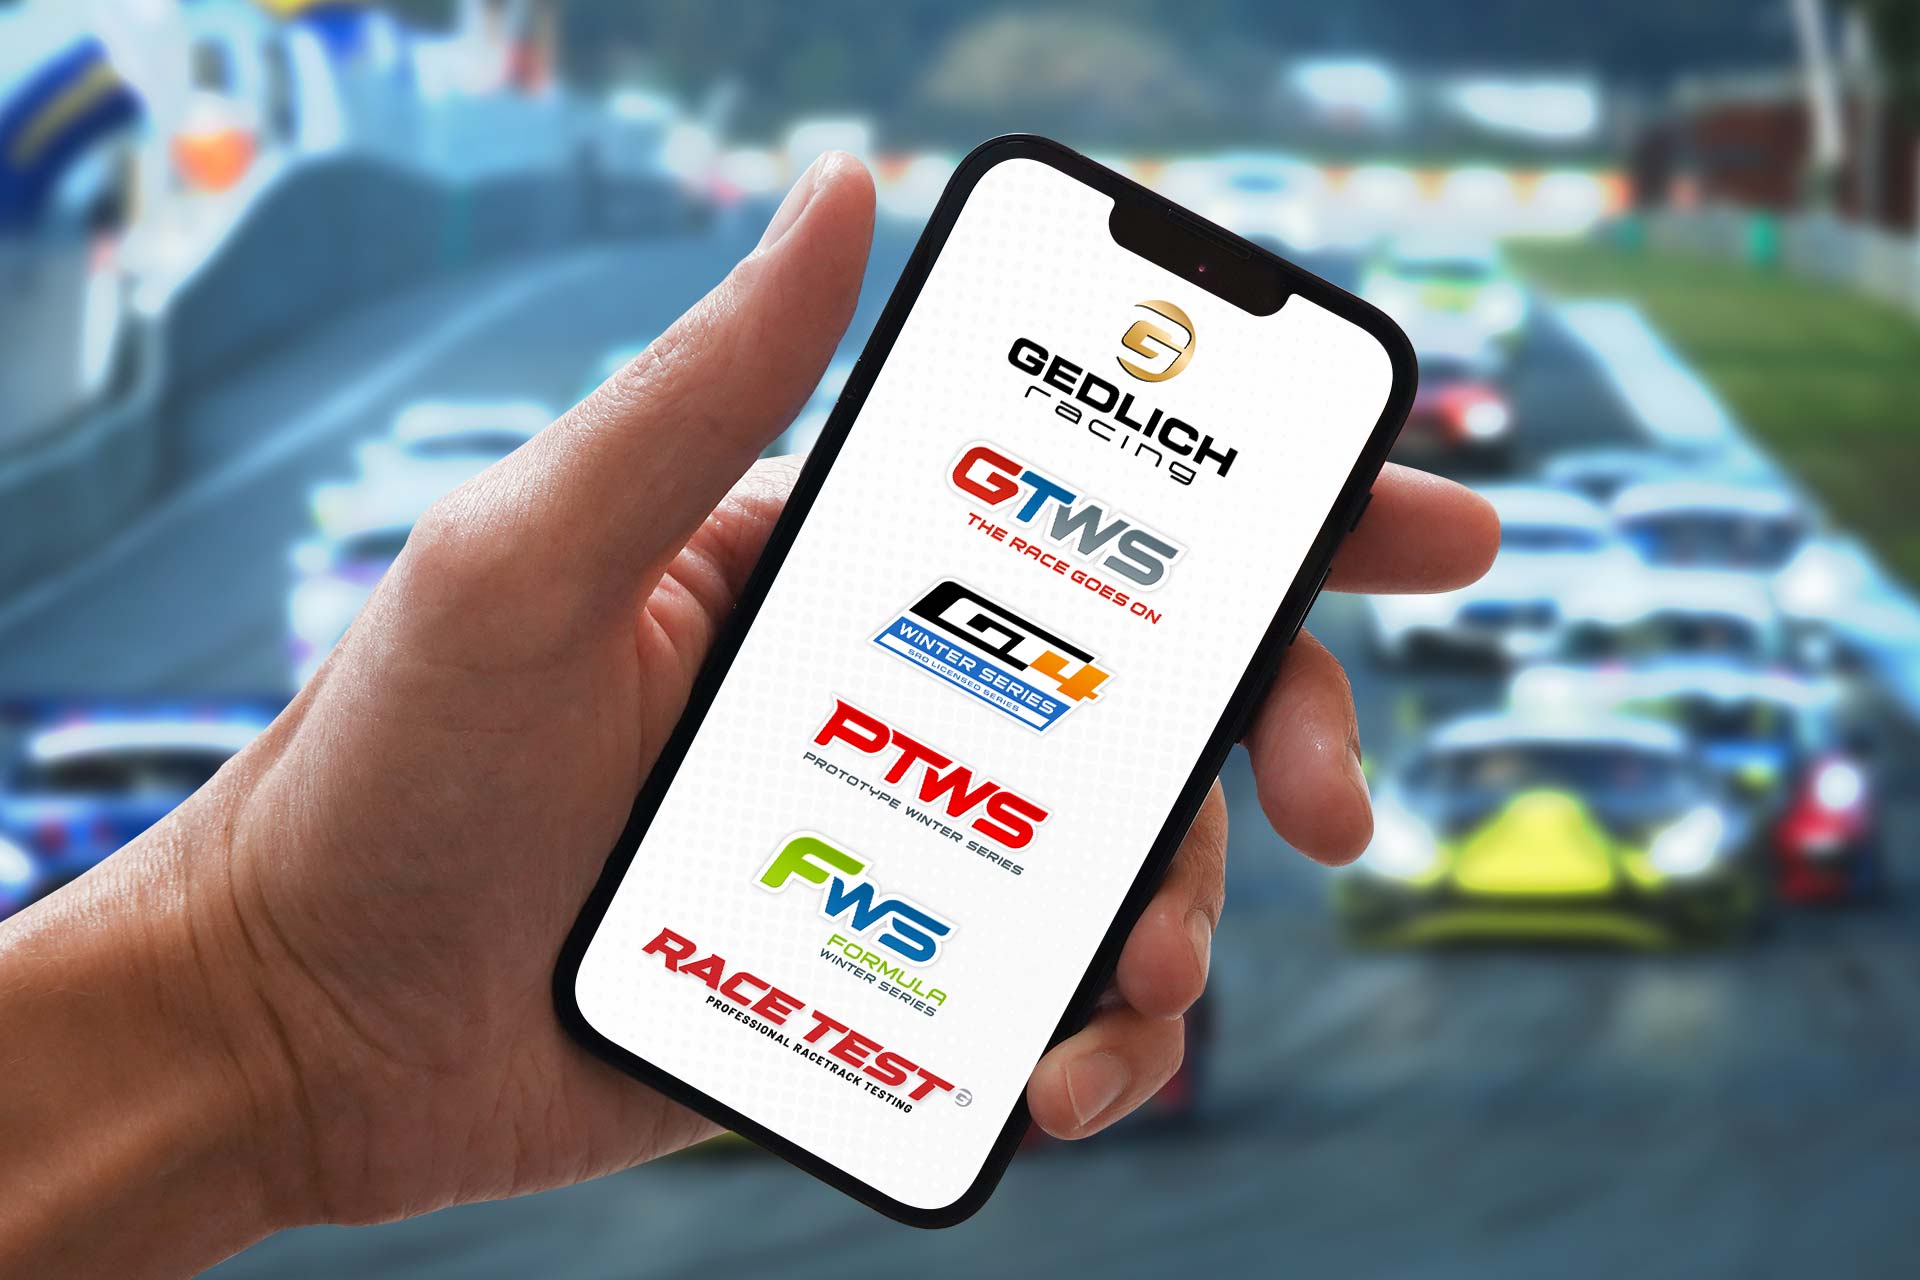 GEDLICH Racing App - Download now and get all the news on your smartphone!